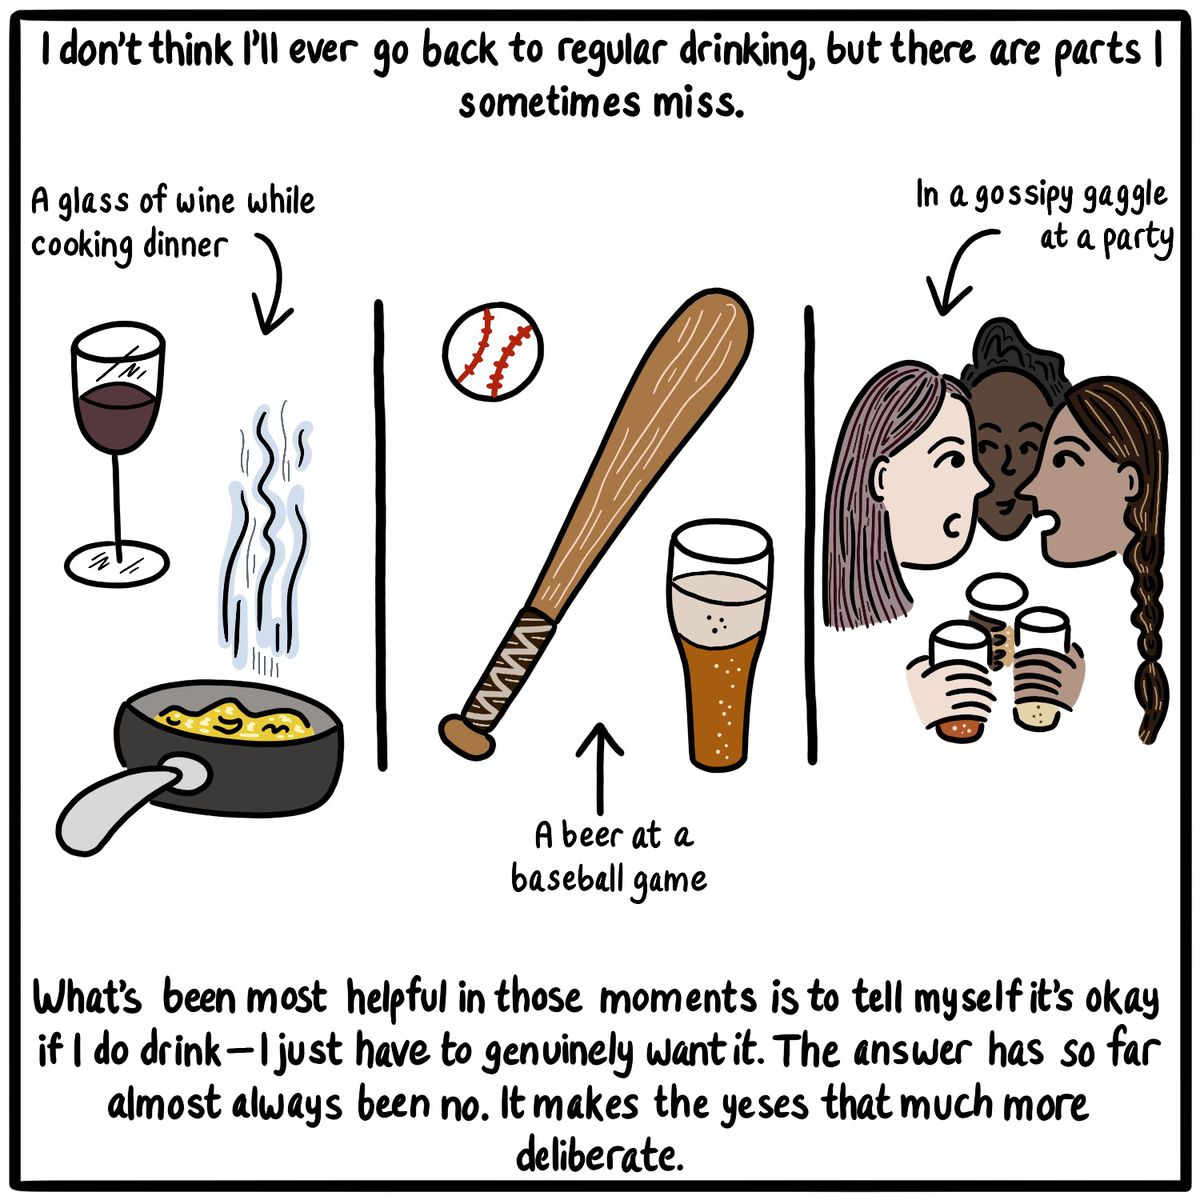 Split-panel image of cooking dinner, attending a baseball game, and going to a party. Caption reads “I don’t think I’ll ever go back to regular drinking, but there are parts I sometimes miss. A glass of wine while cooking dinner. A beer at a baseball game. In a gossipy gaggle at a party. What’s been most helpful in those moments is to tell myself it’s okay if I do drink — I just have to genuinely want it. The answer has so far almost always been no. It makes the yeses that much more deliberate.”